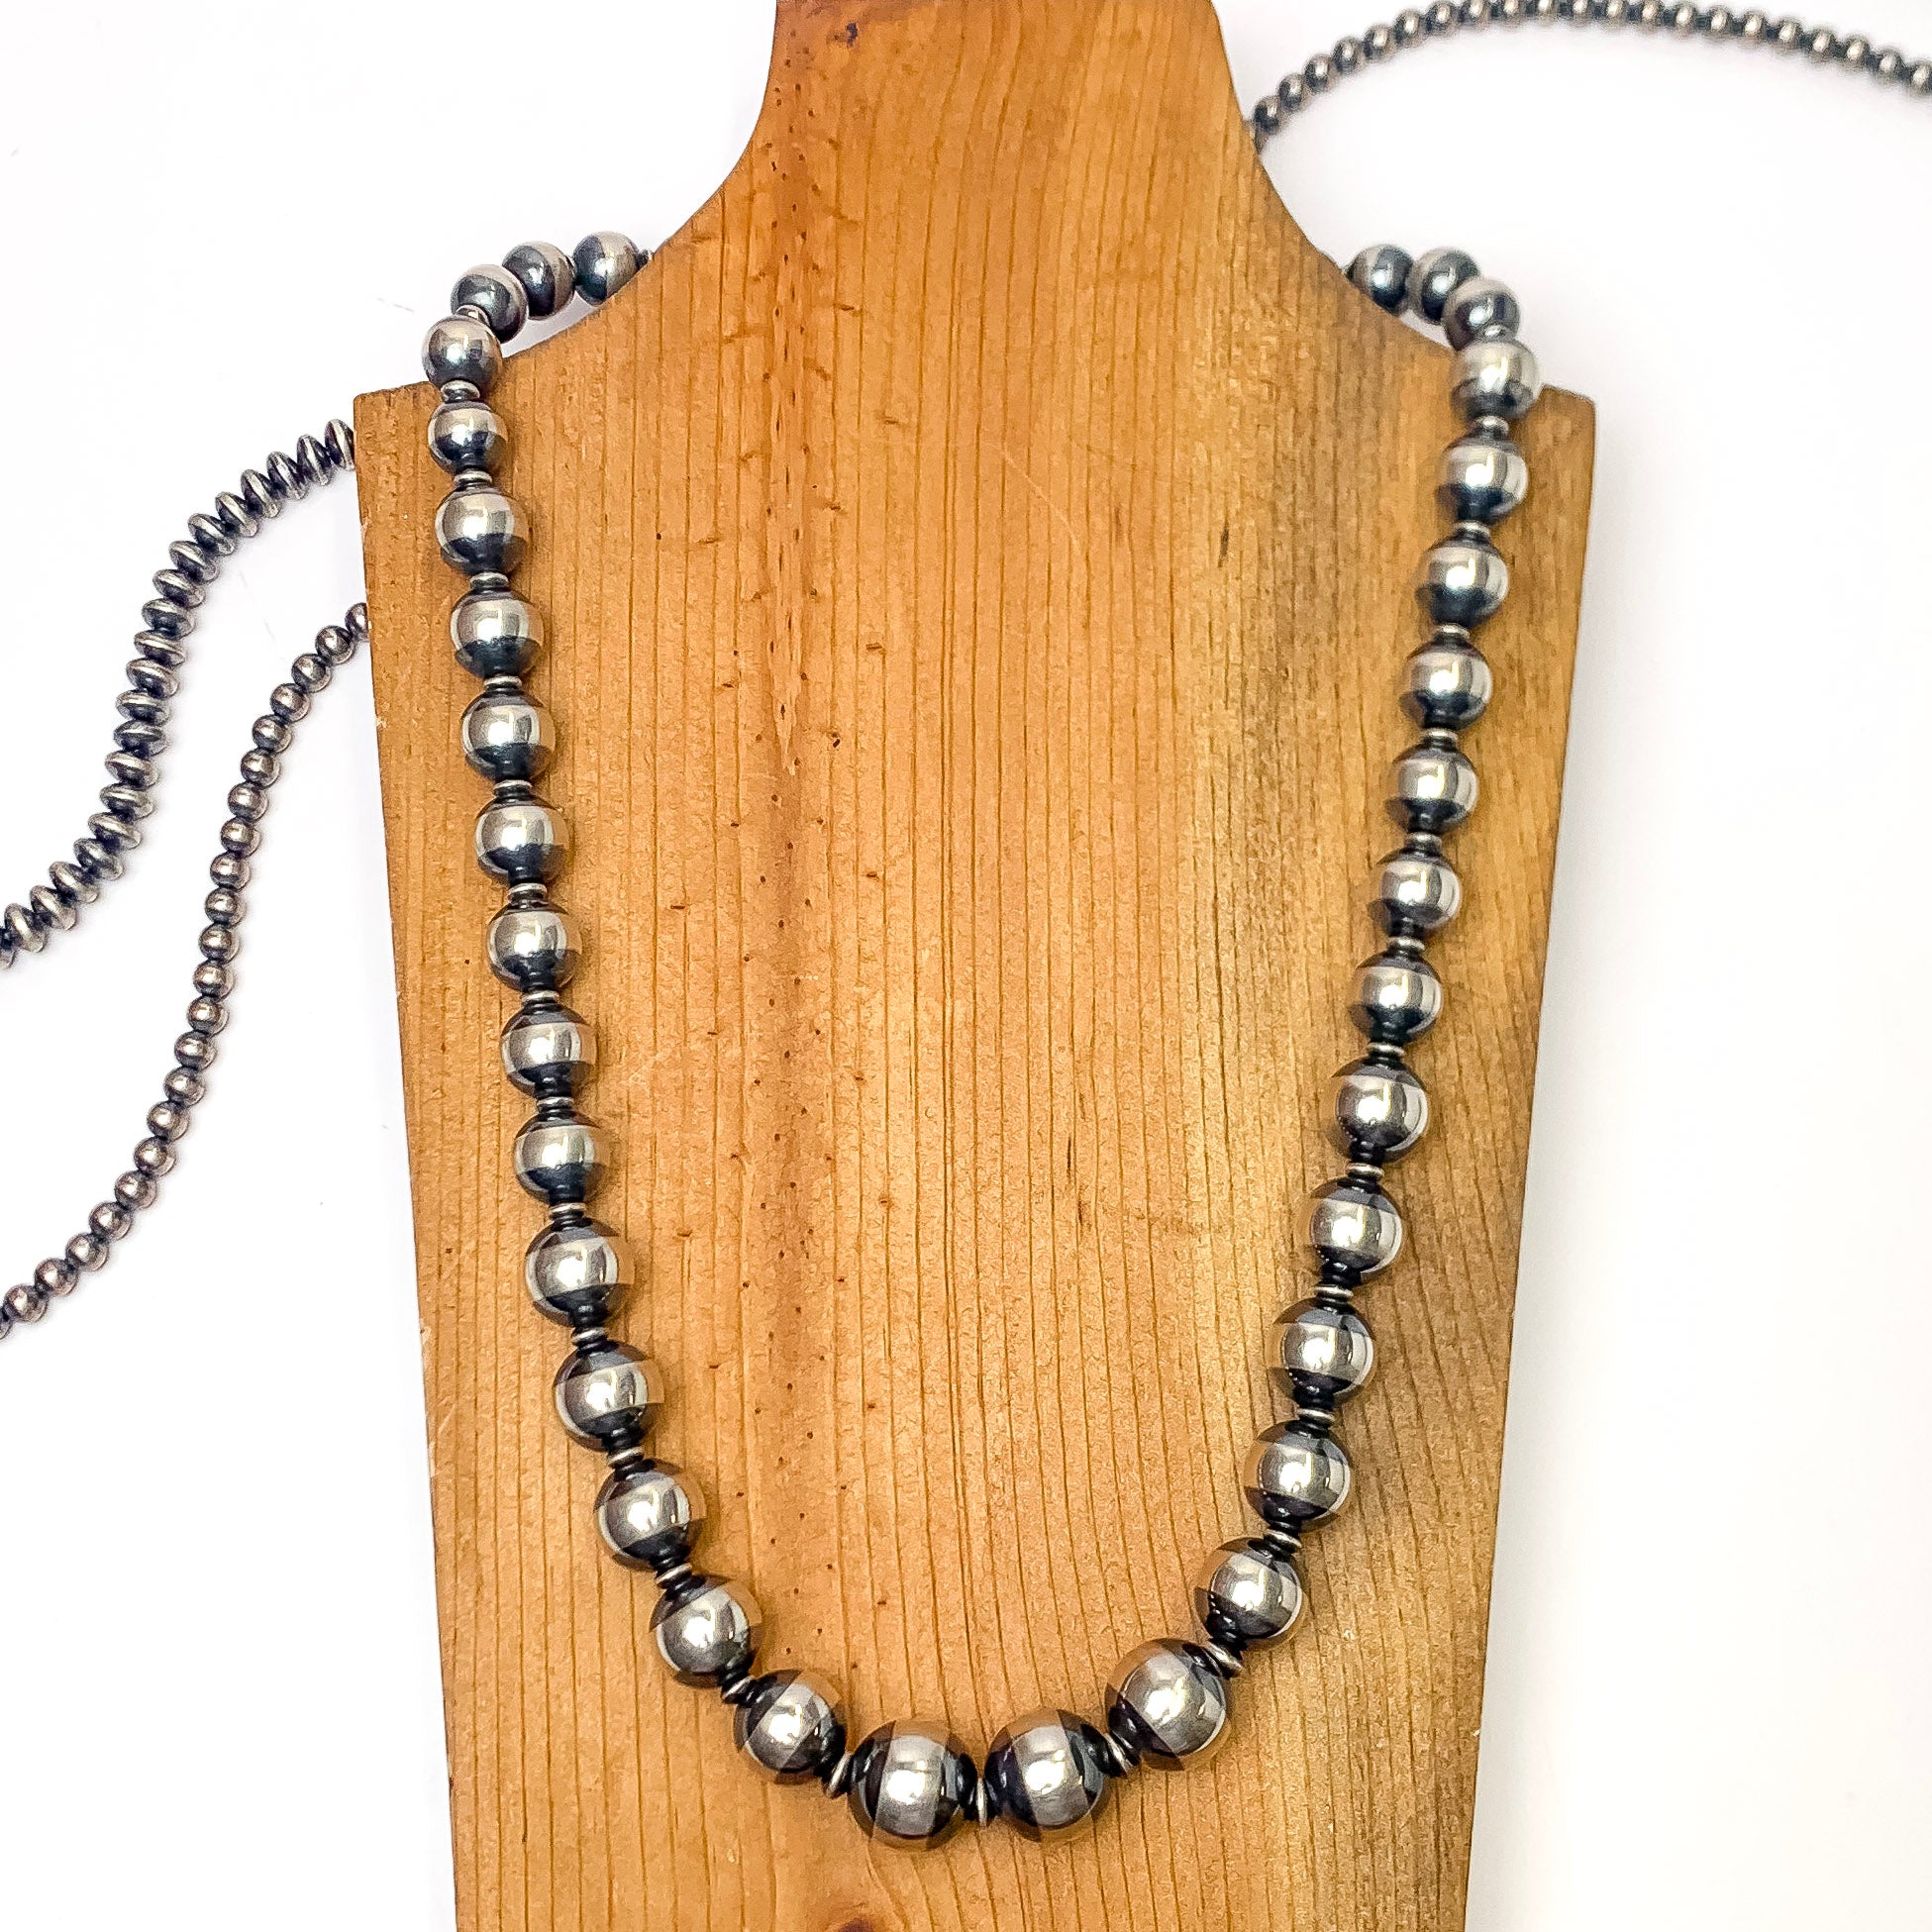 In the picture is a handmade sterling silver saucer Navajo pearl necklace with a white background